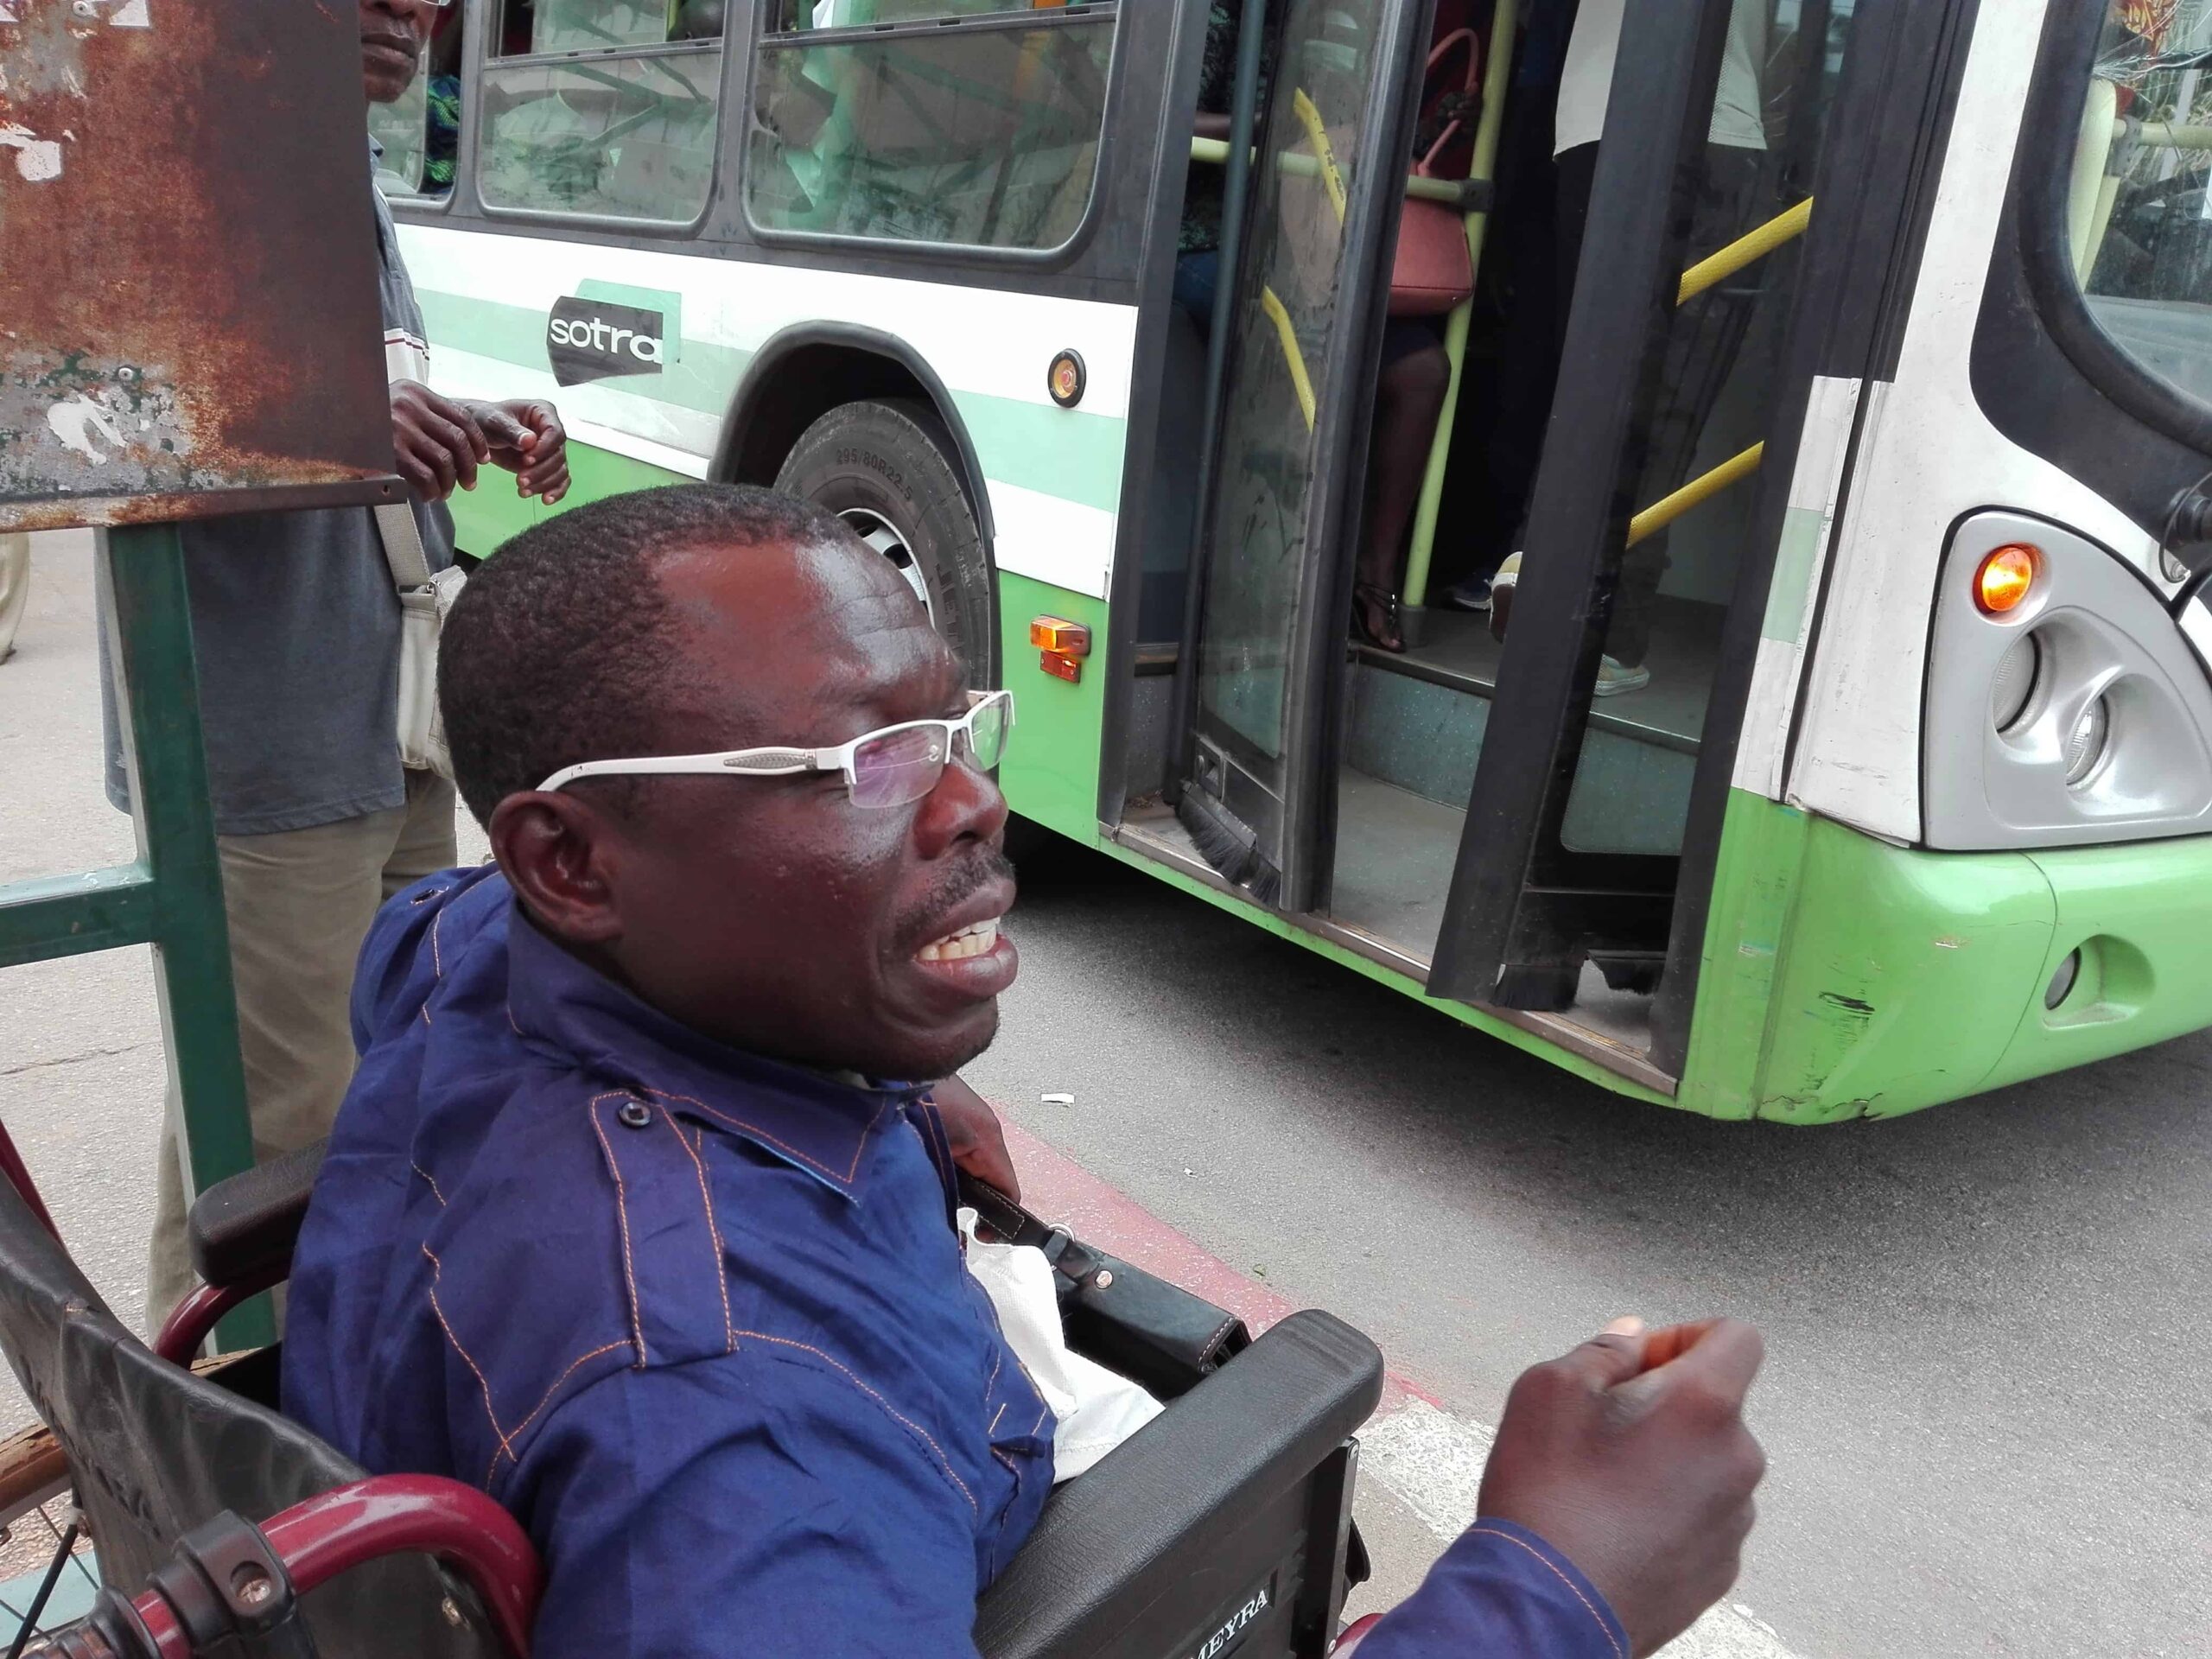 A man in a wheelchair waits on the side of the street where a bus has stopped.